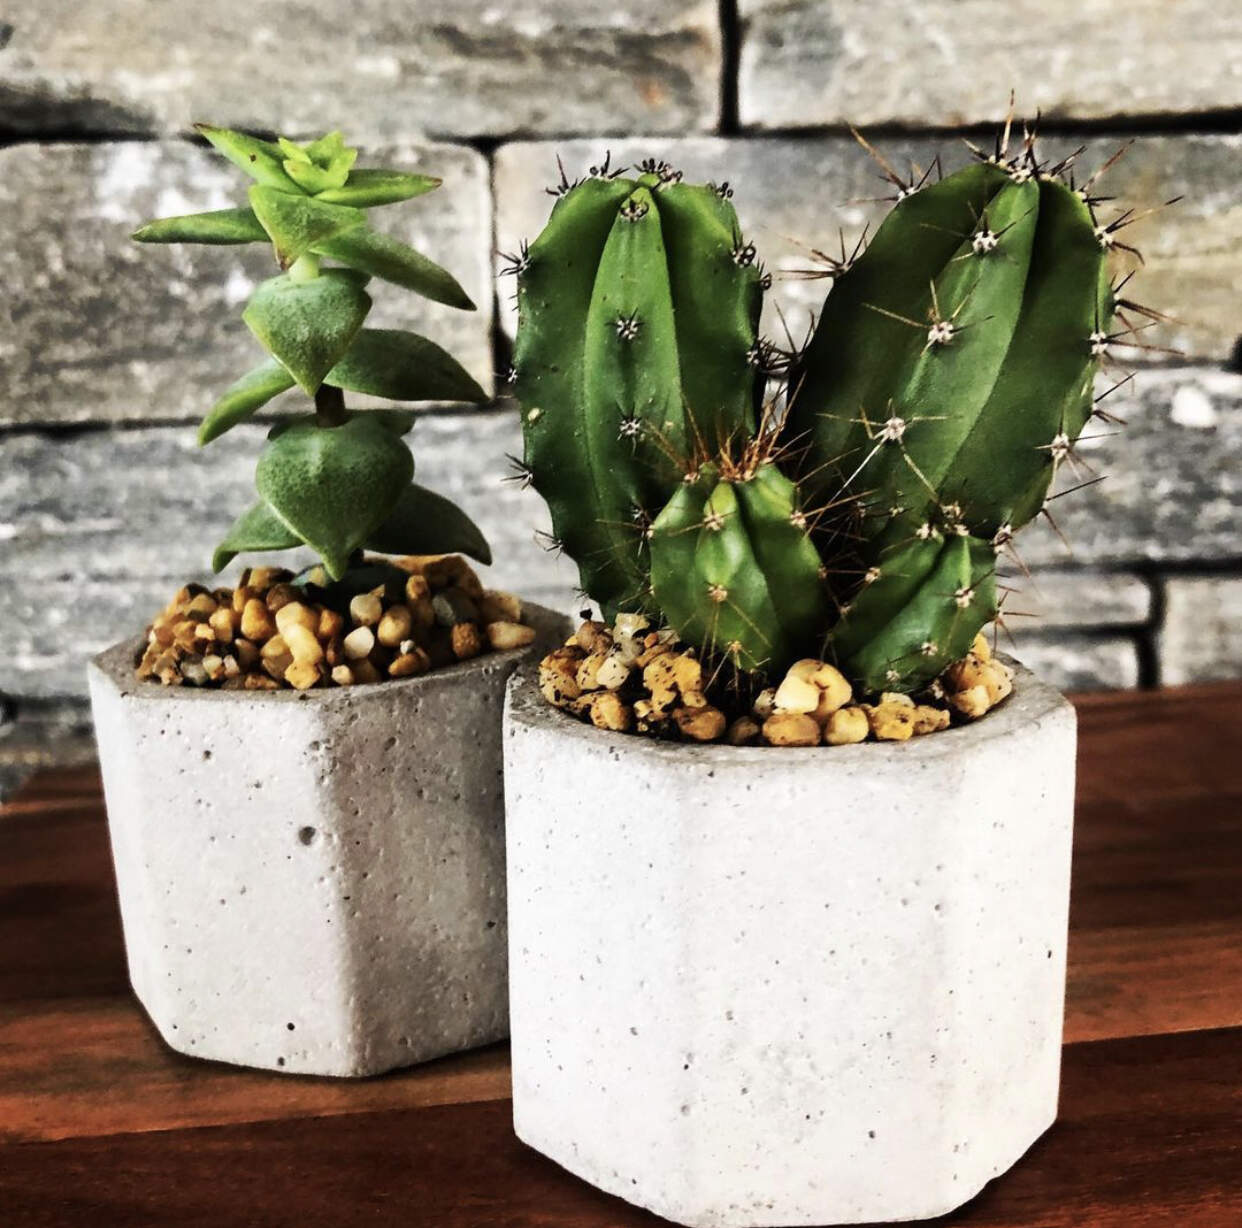 YAYCORK.IE - Here are 3 lovely Irish companies that will deliver lush houseplants to your doorstep By Katie Mythen-Lynch April 13, 2021